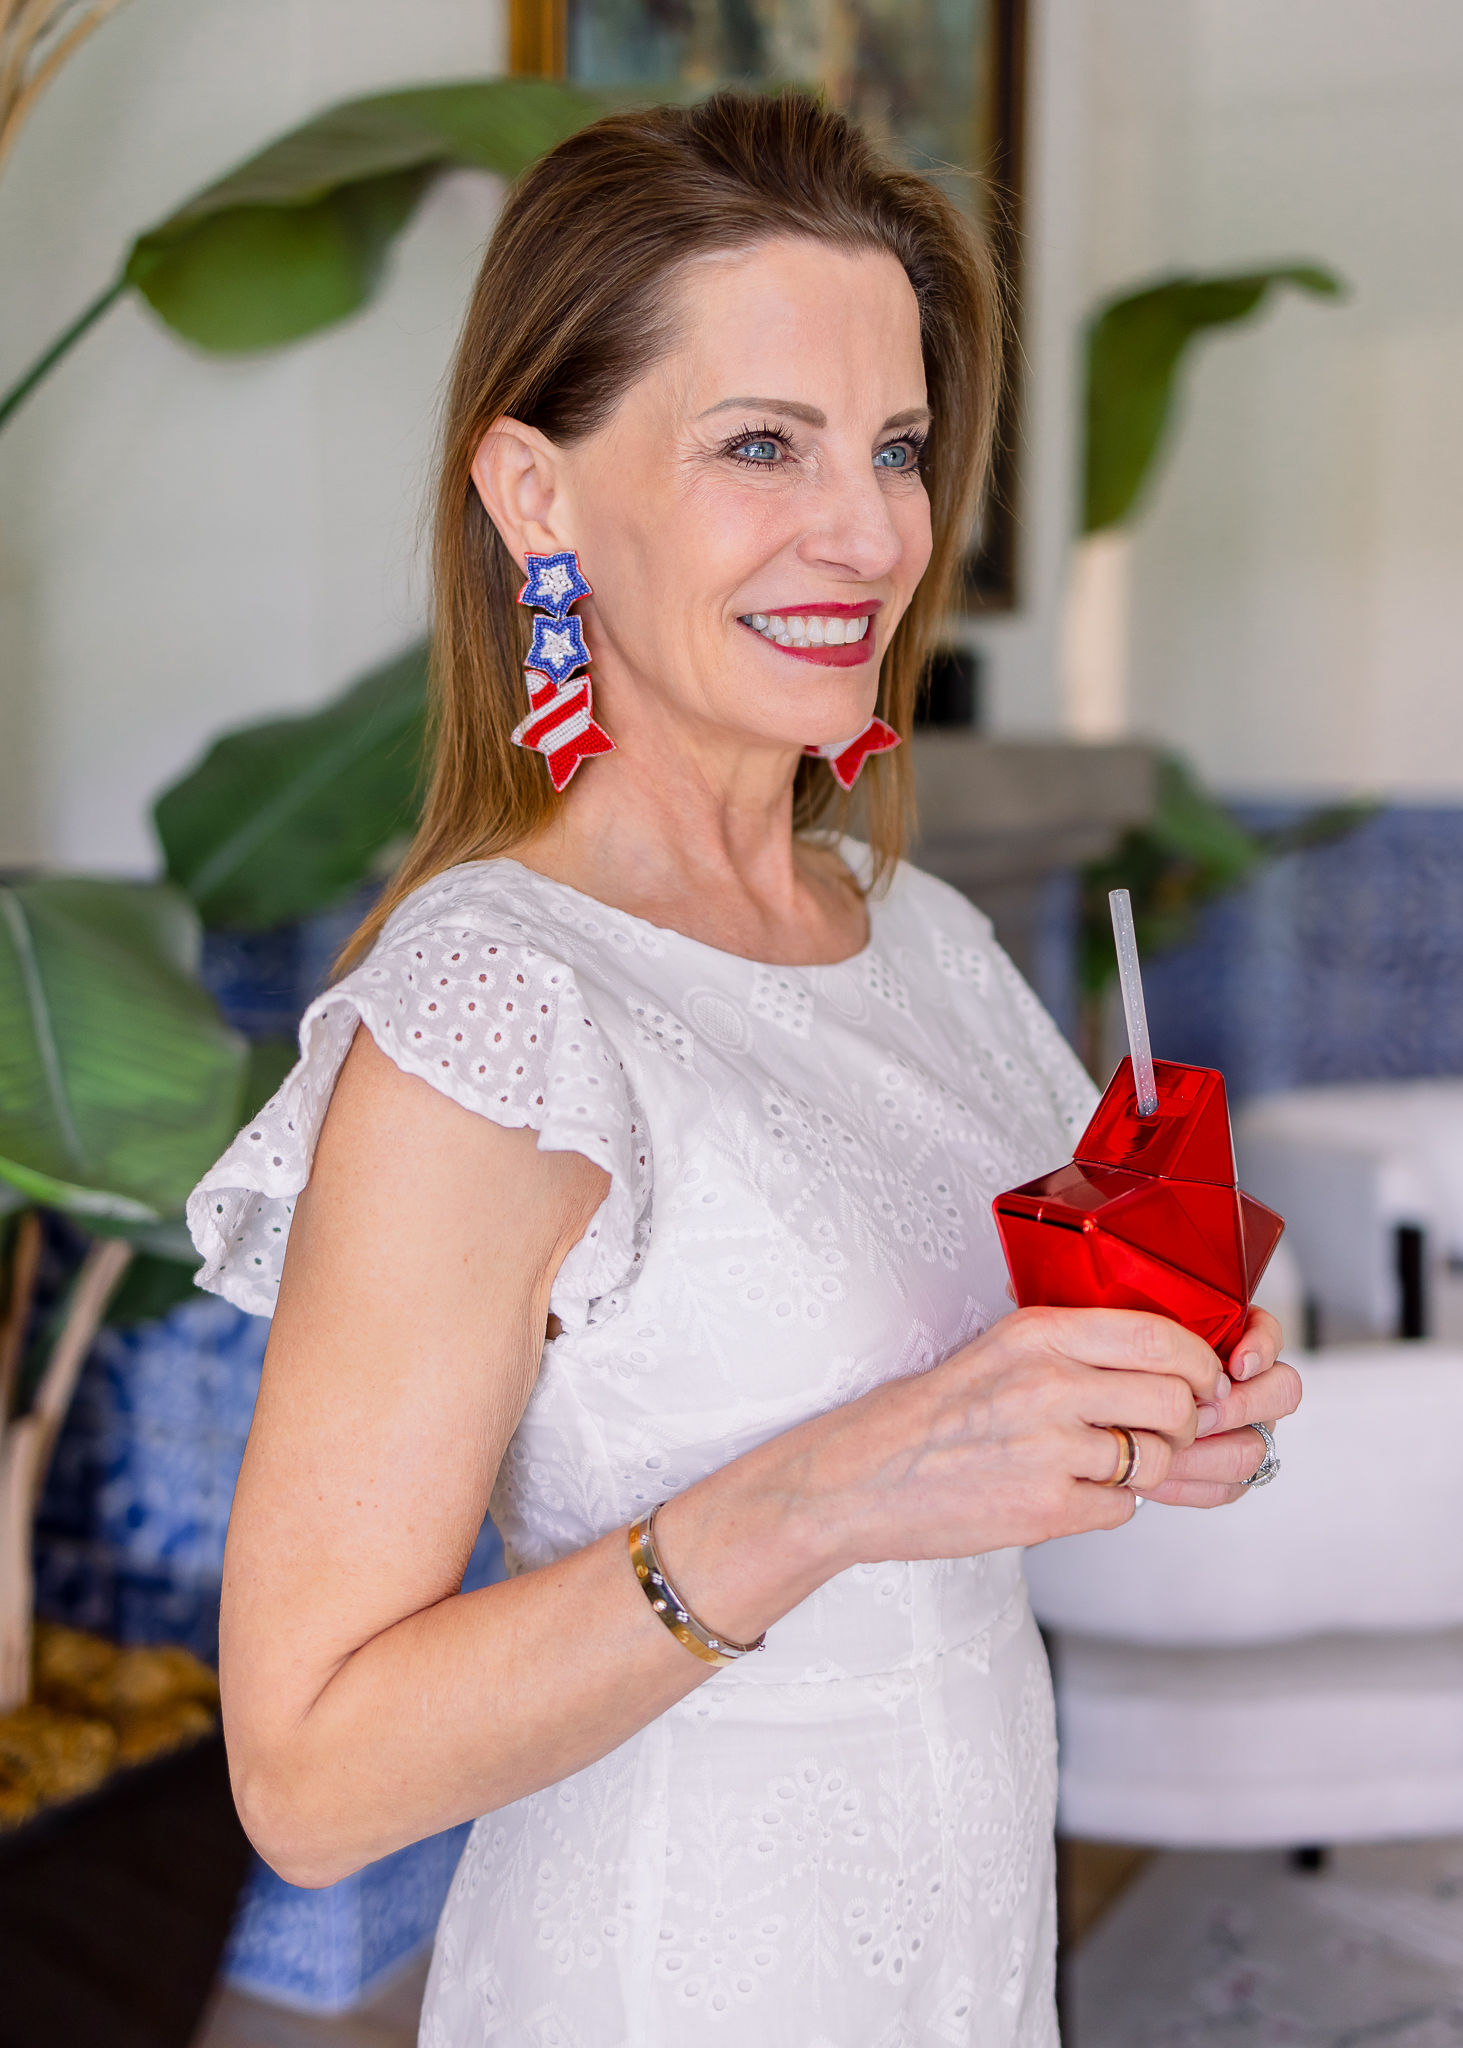 Red, White, and Blue Style Guide
Star Cup
4th of July look

